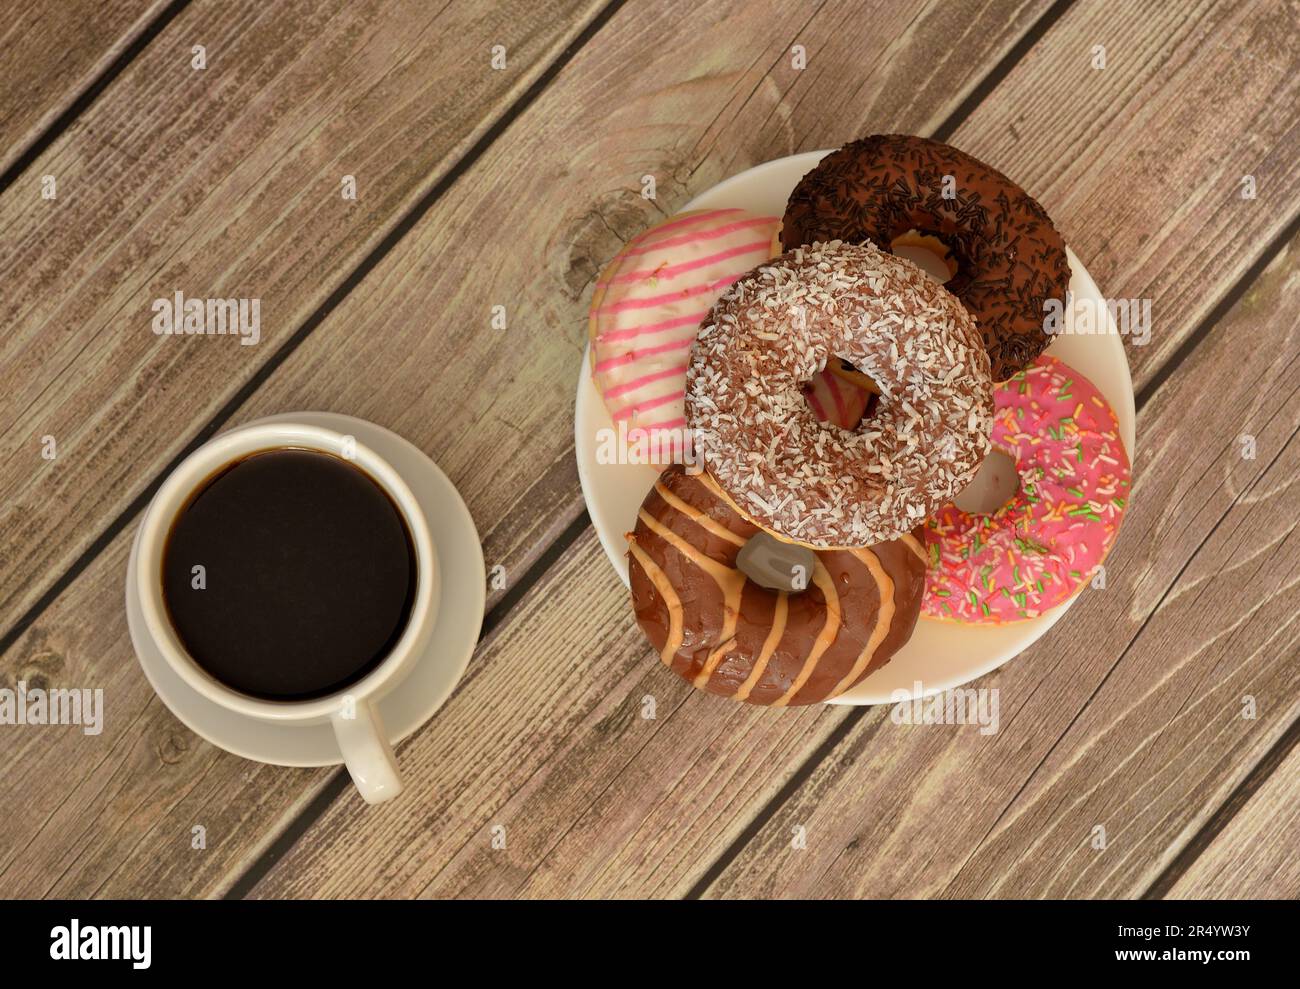 A cup of hot black coffee and a plate with several fresh donuts in multi-colored glaze on a light wooden table. Top view, flat lay. Stock Photo